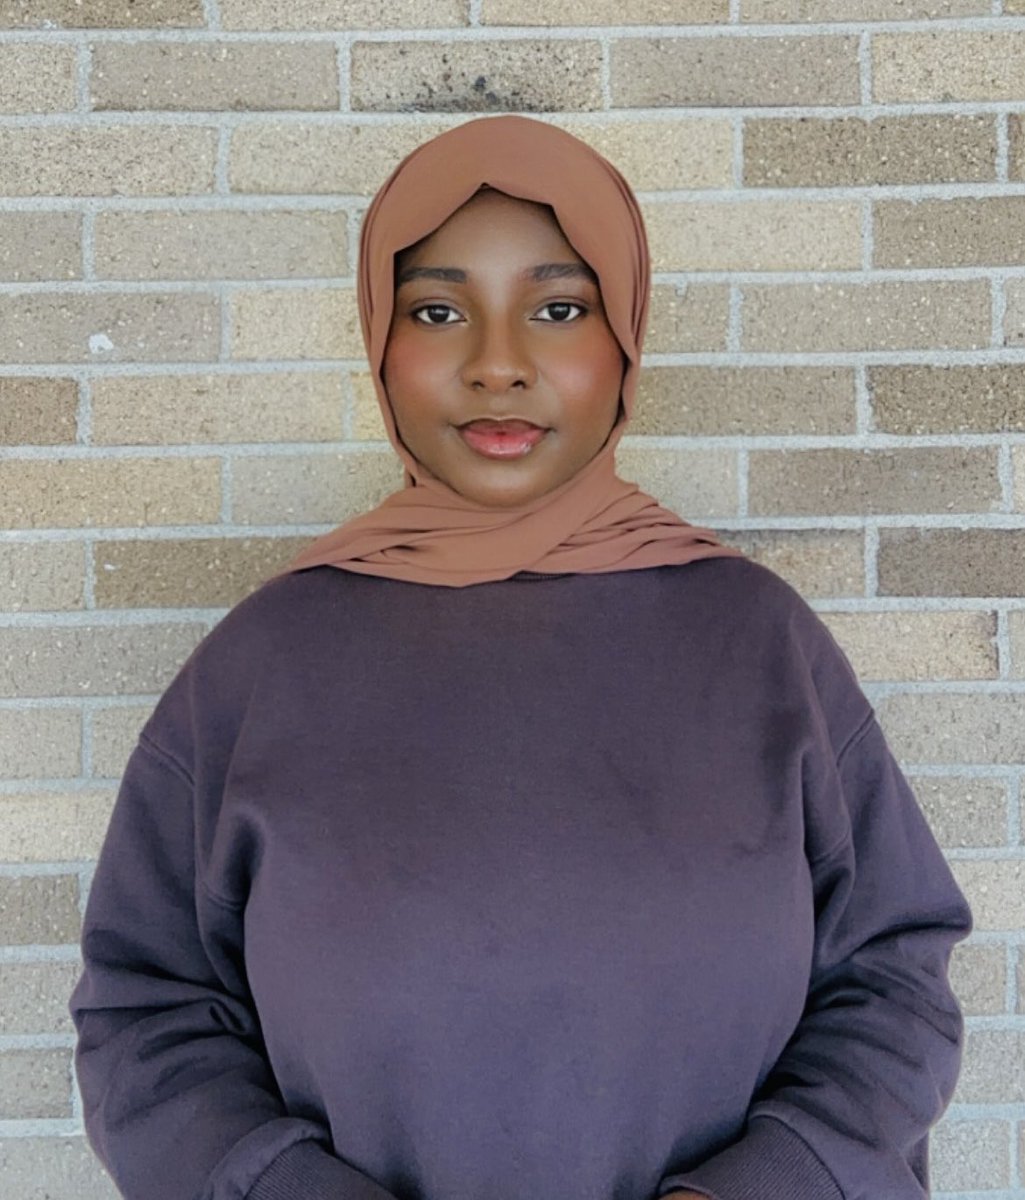 @RIC_BehavHealth graduating senior, Aji Fatou Sanneh has earned the Robin K. Montvilo Award in Behavioral Health Studies for her exemplary academic & professional training performance. She already has a job offer and will be looking towards graduate school in the future! @RICNews